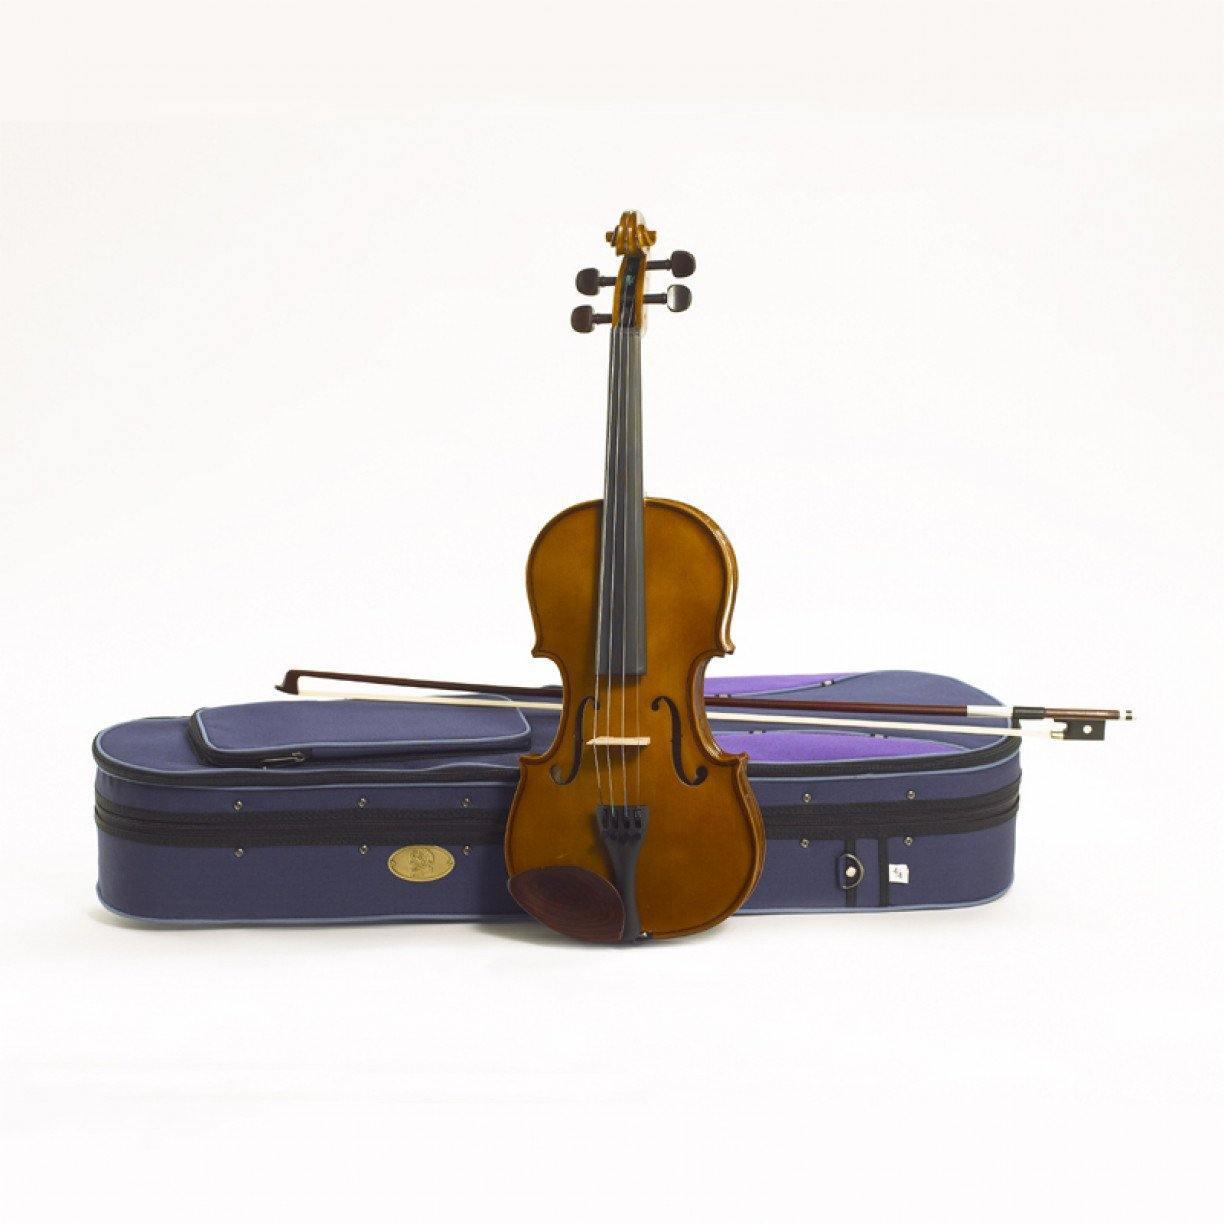 Stentor 3/4 Size Violin Outfit Student Antique Chestnut - Orchestral - Strings Section by Stentor at Muso's Stuff